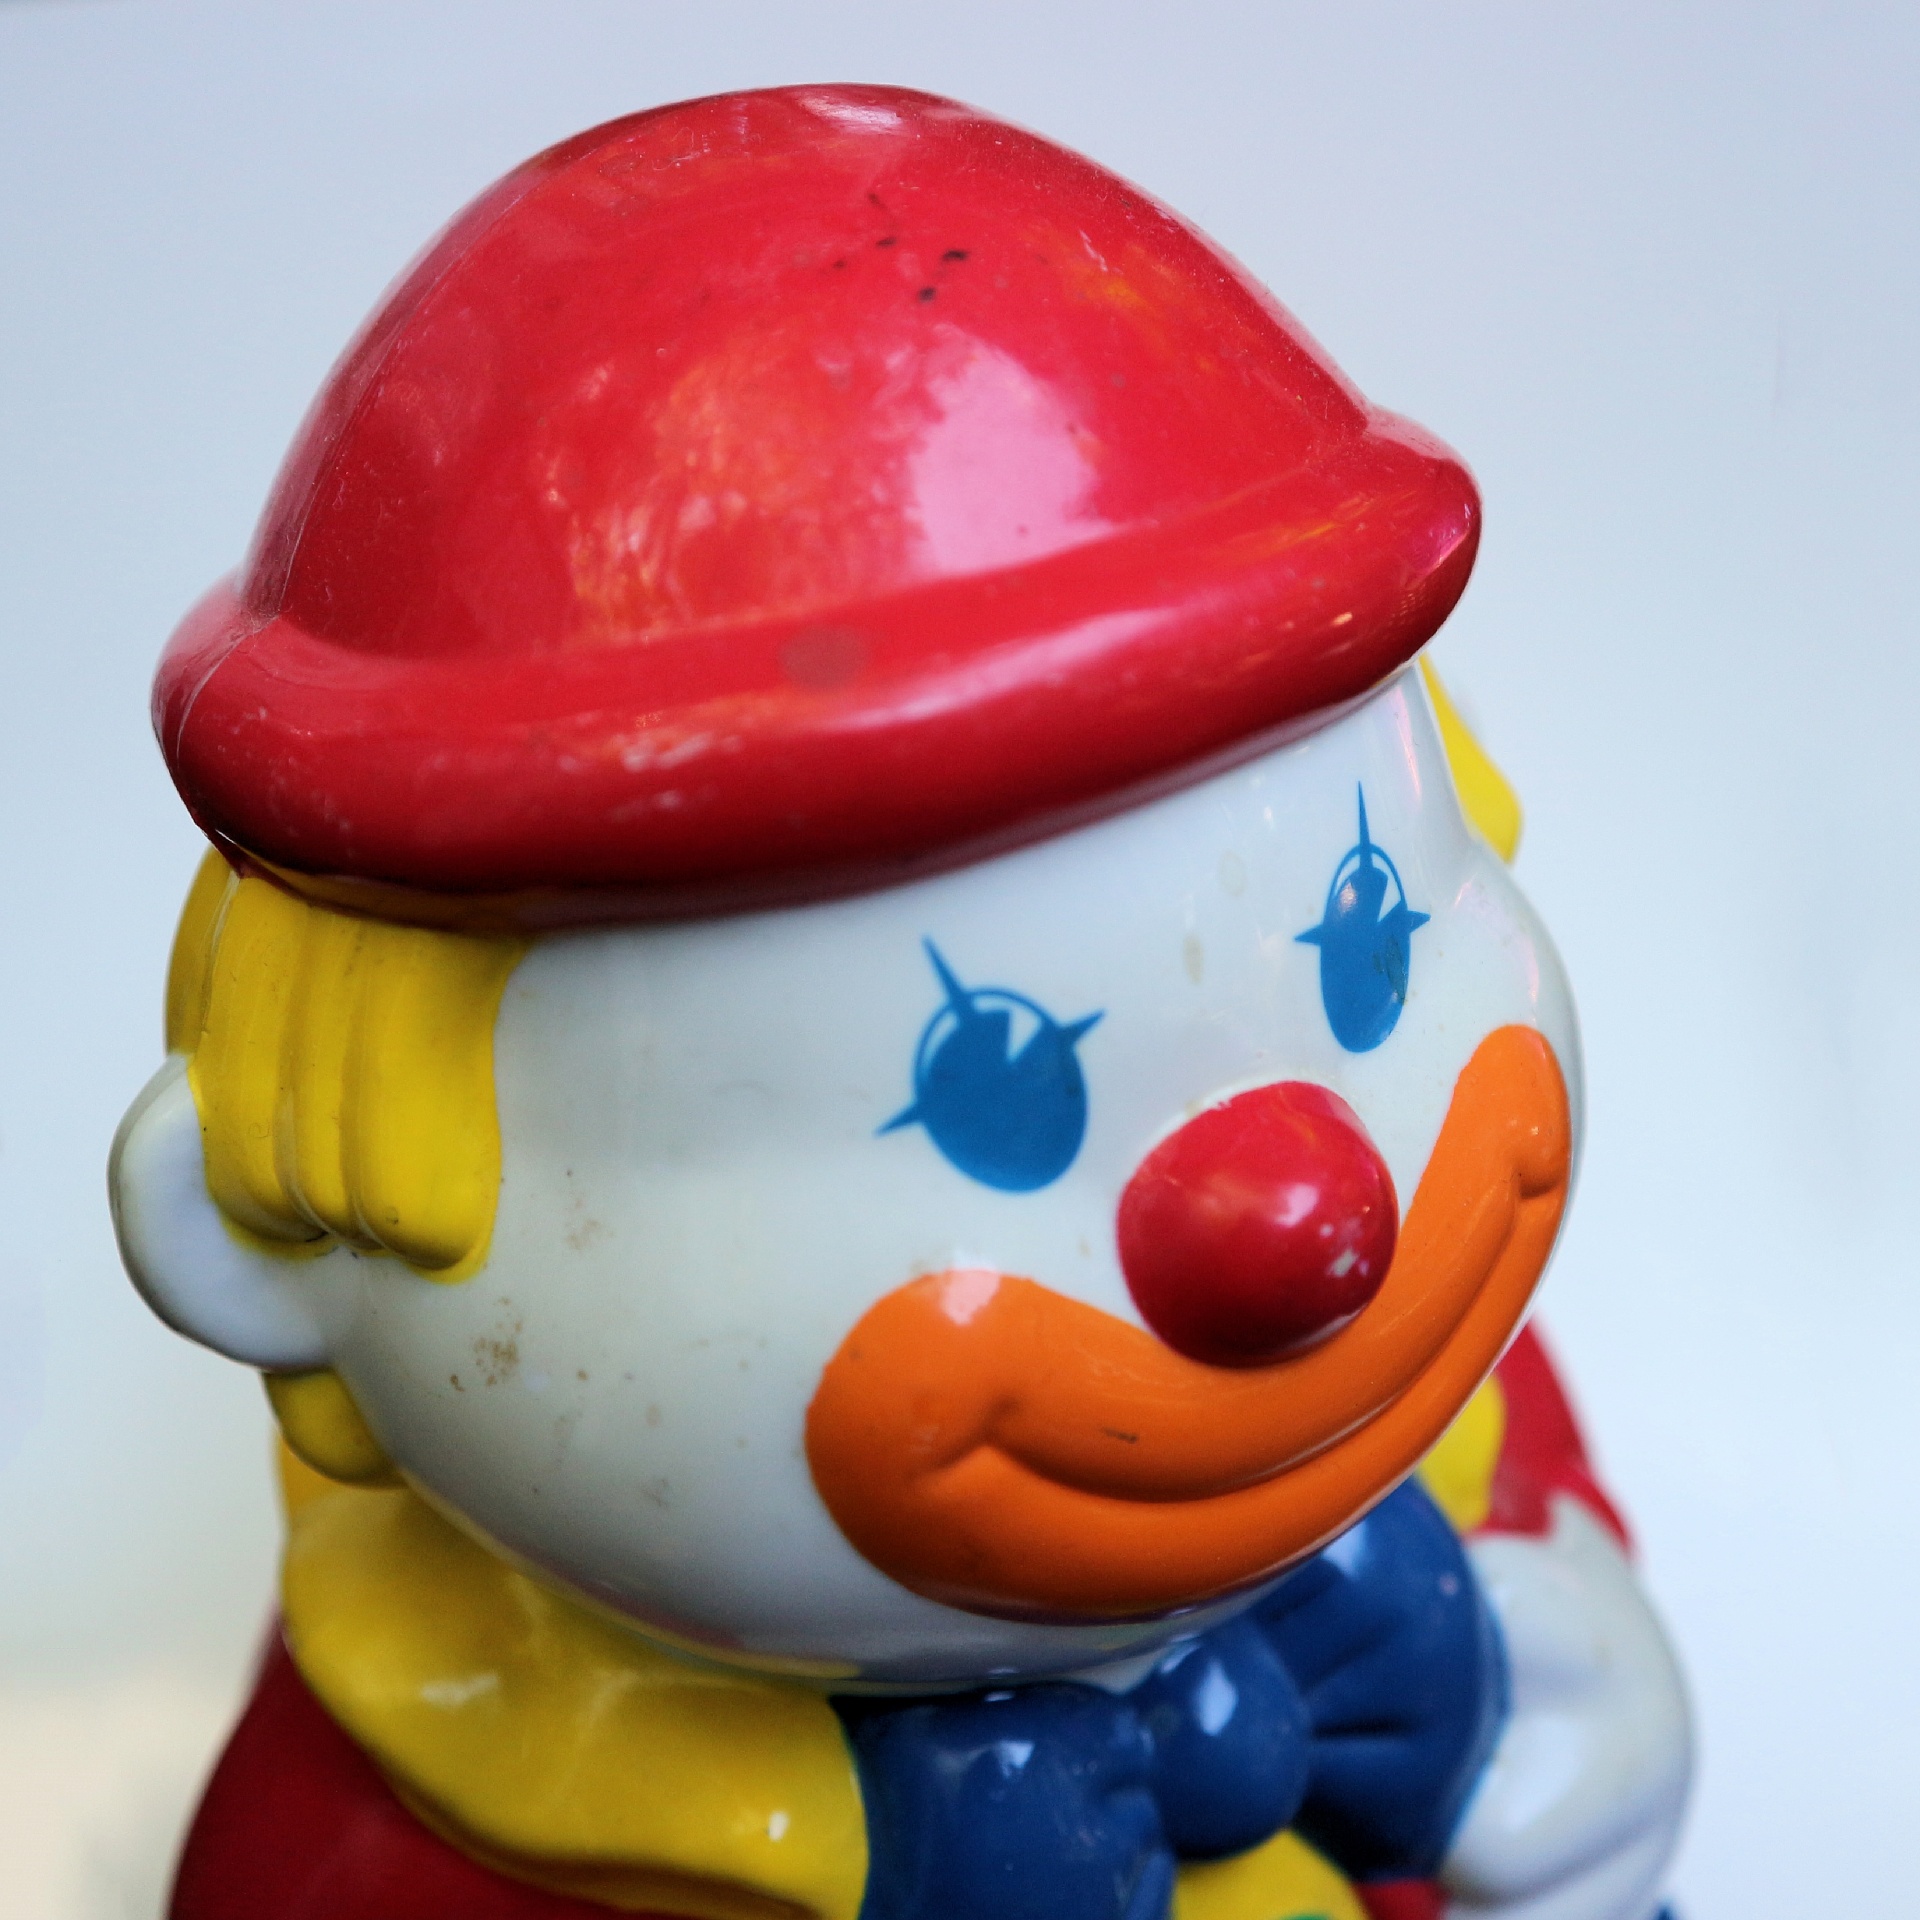 clown face toy free photo